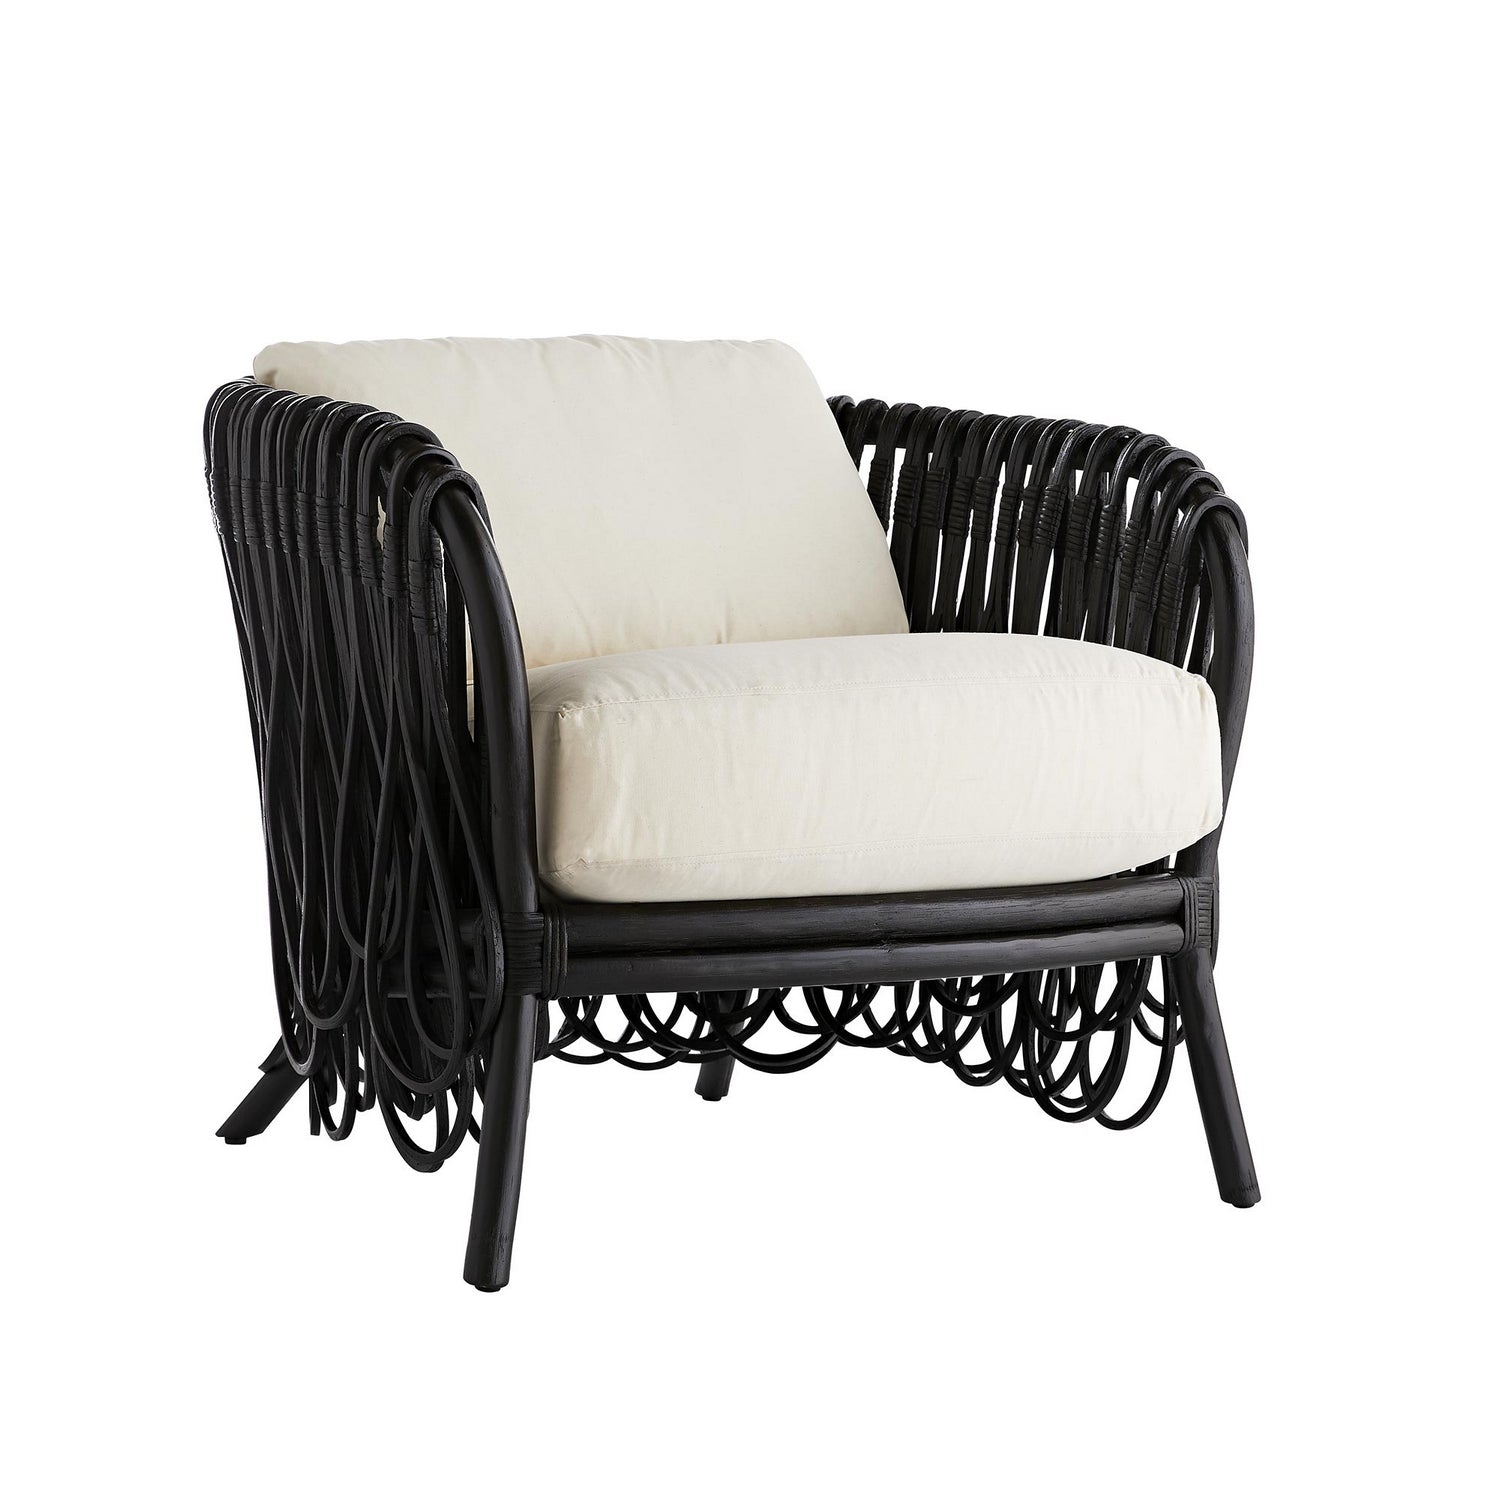 Chair from the Strata collection in White finish